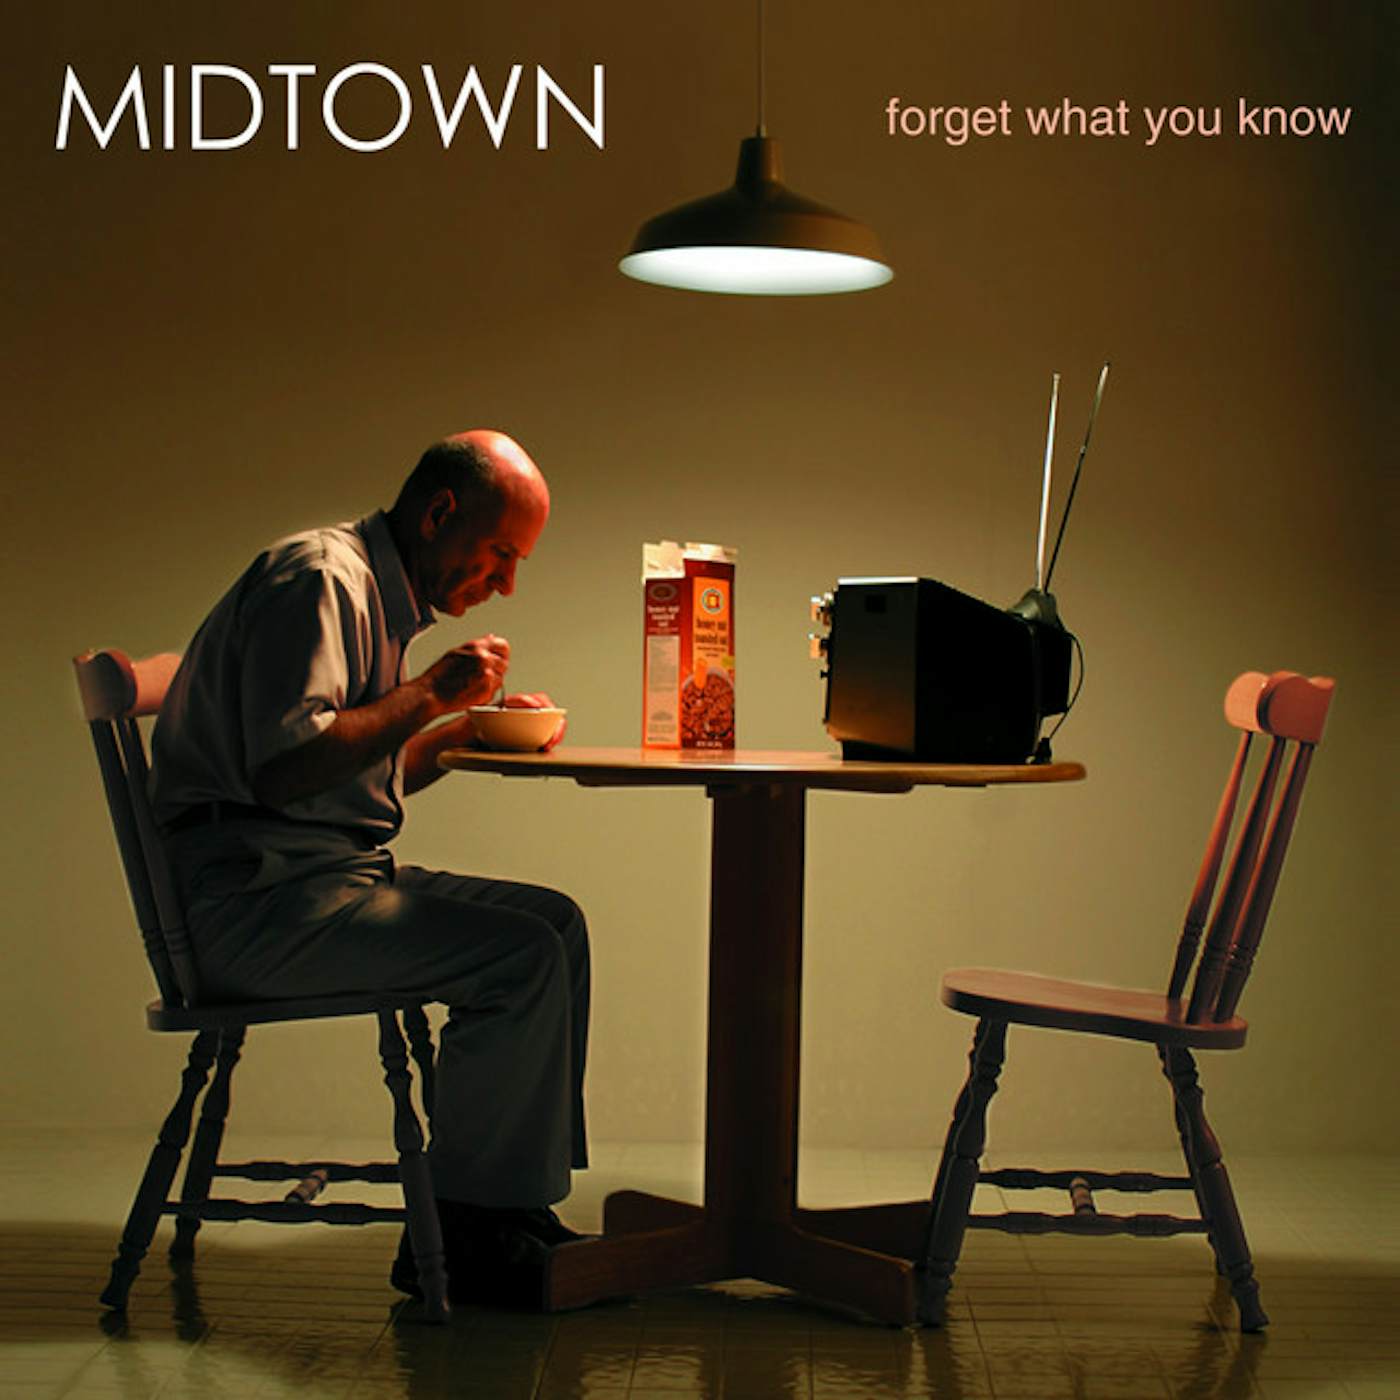 Midtown FORGET WHAT YOU KNOW CD